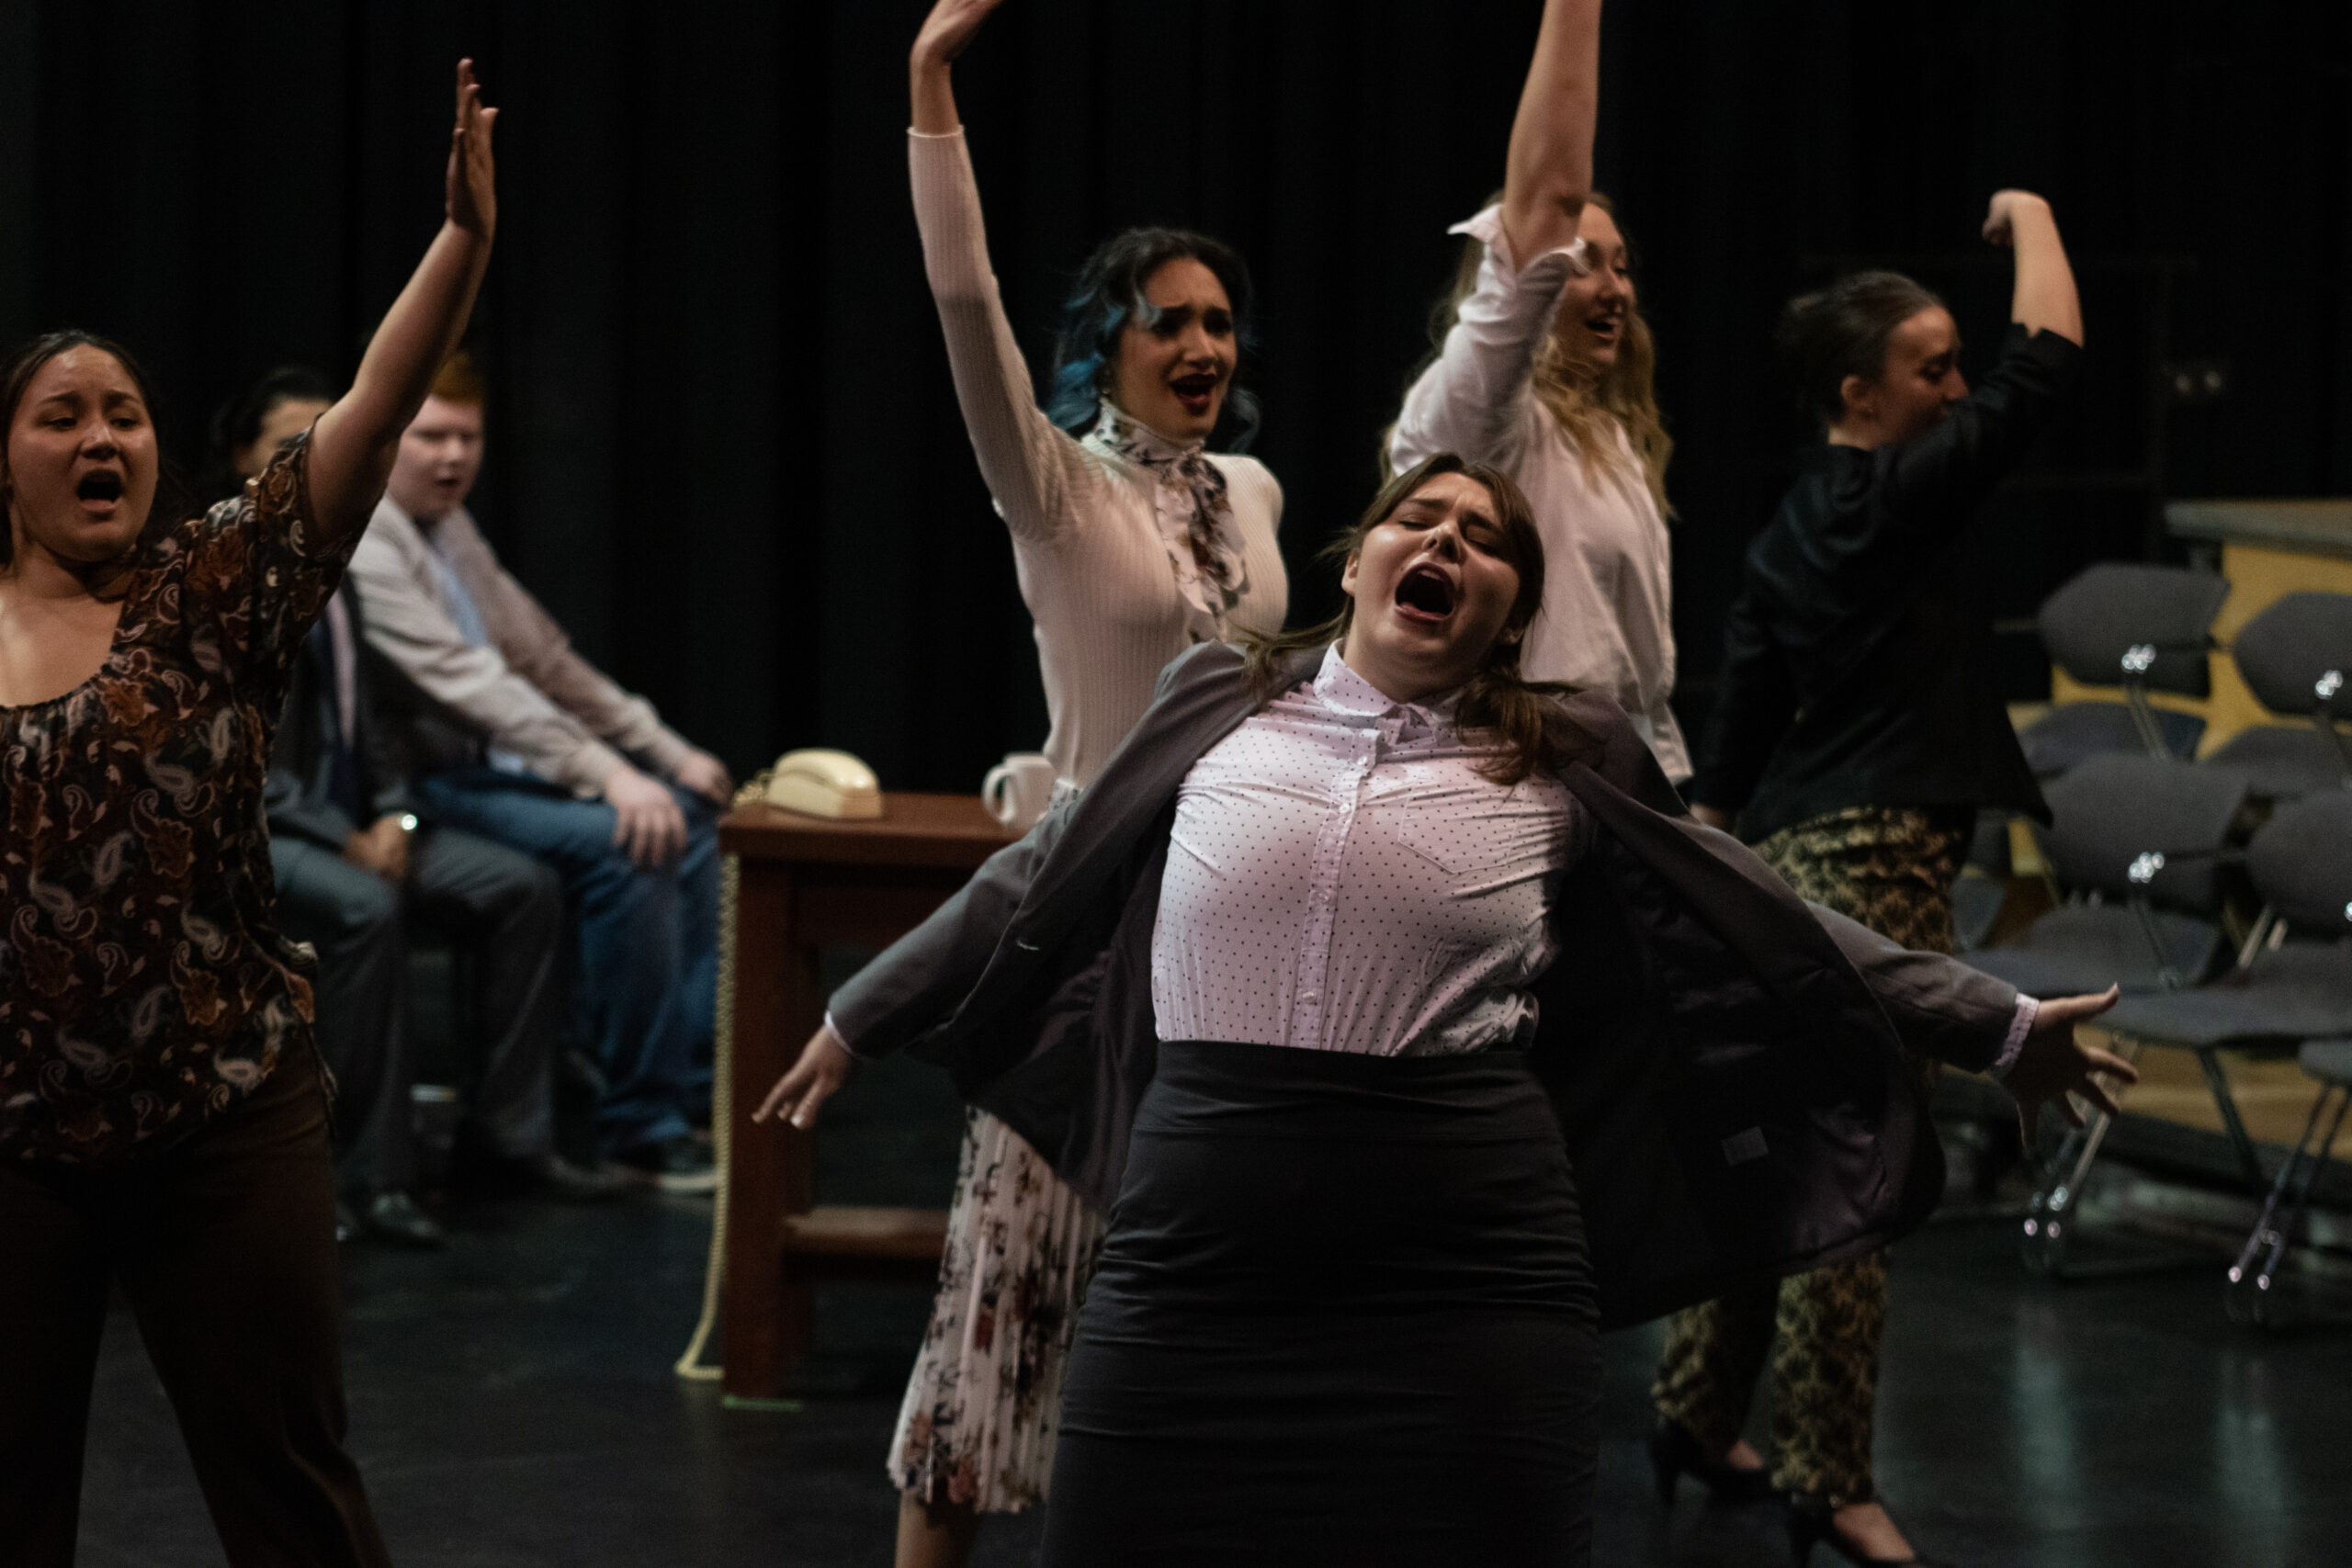 Comedic, entertaining and completely unhinged: UNR’s student-directed “9 to 5” theater production